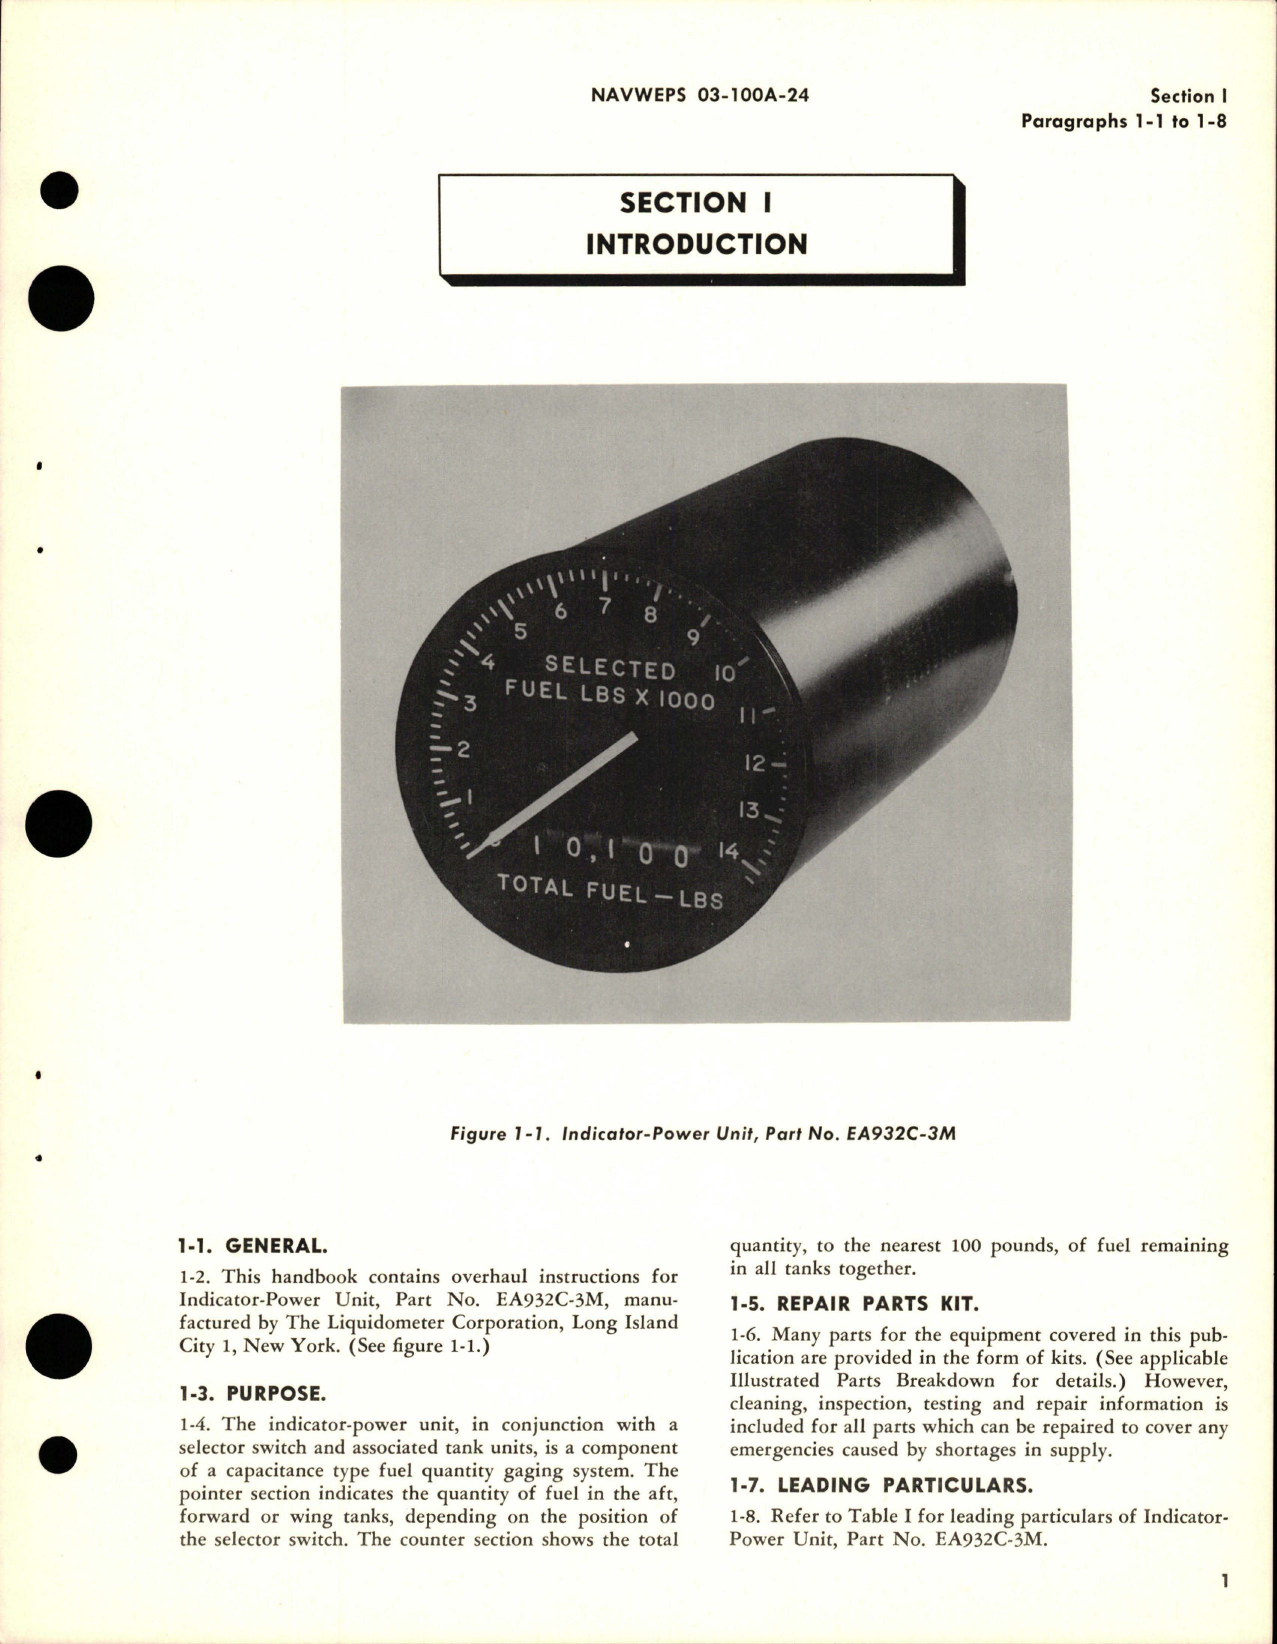 Sample page 5 from AirCorps Library document: Overhaul Instructions for Indicator-Power Unit - Part EA932C-3M